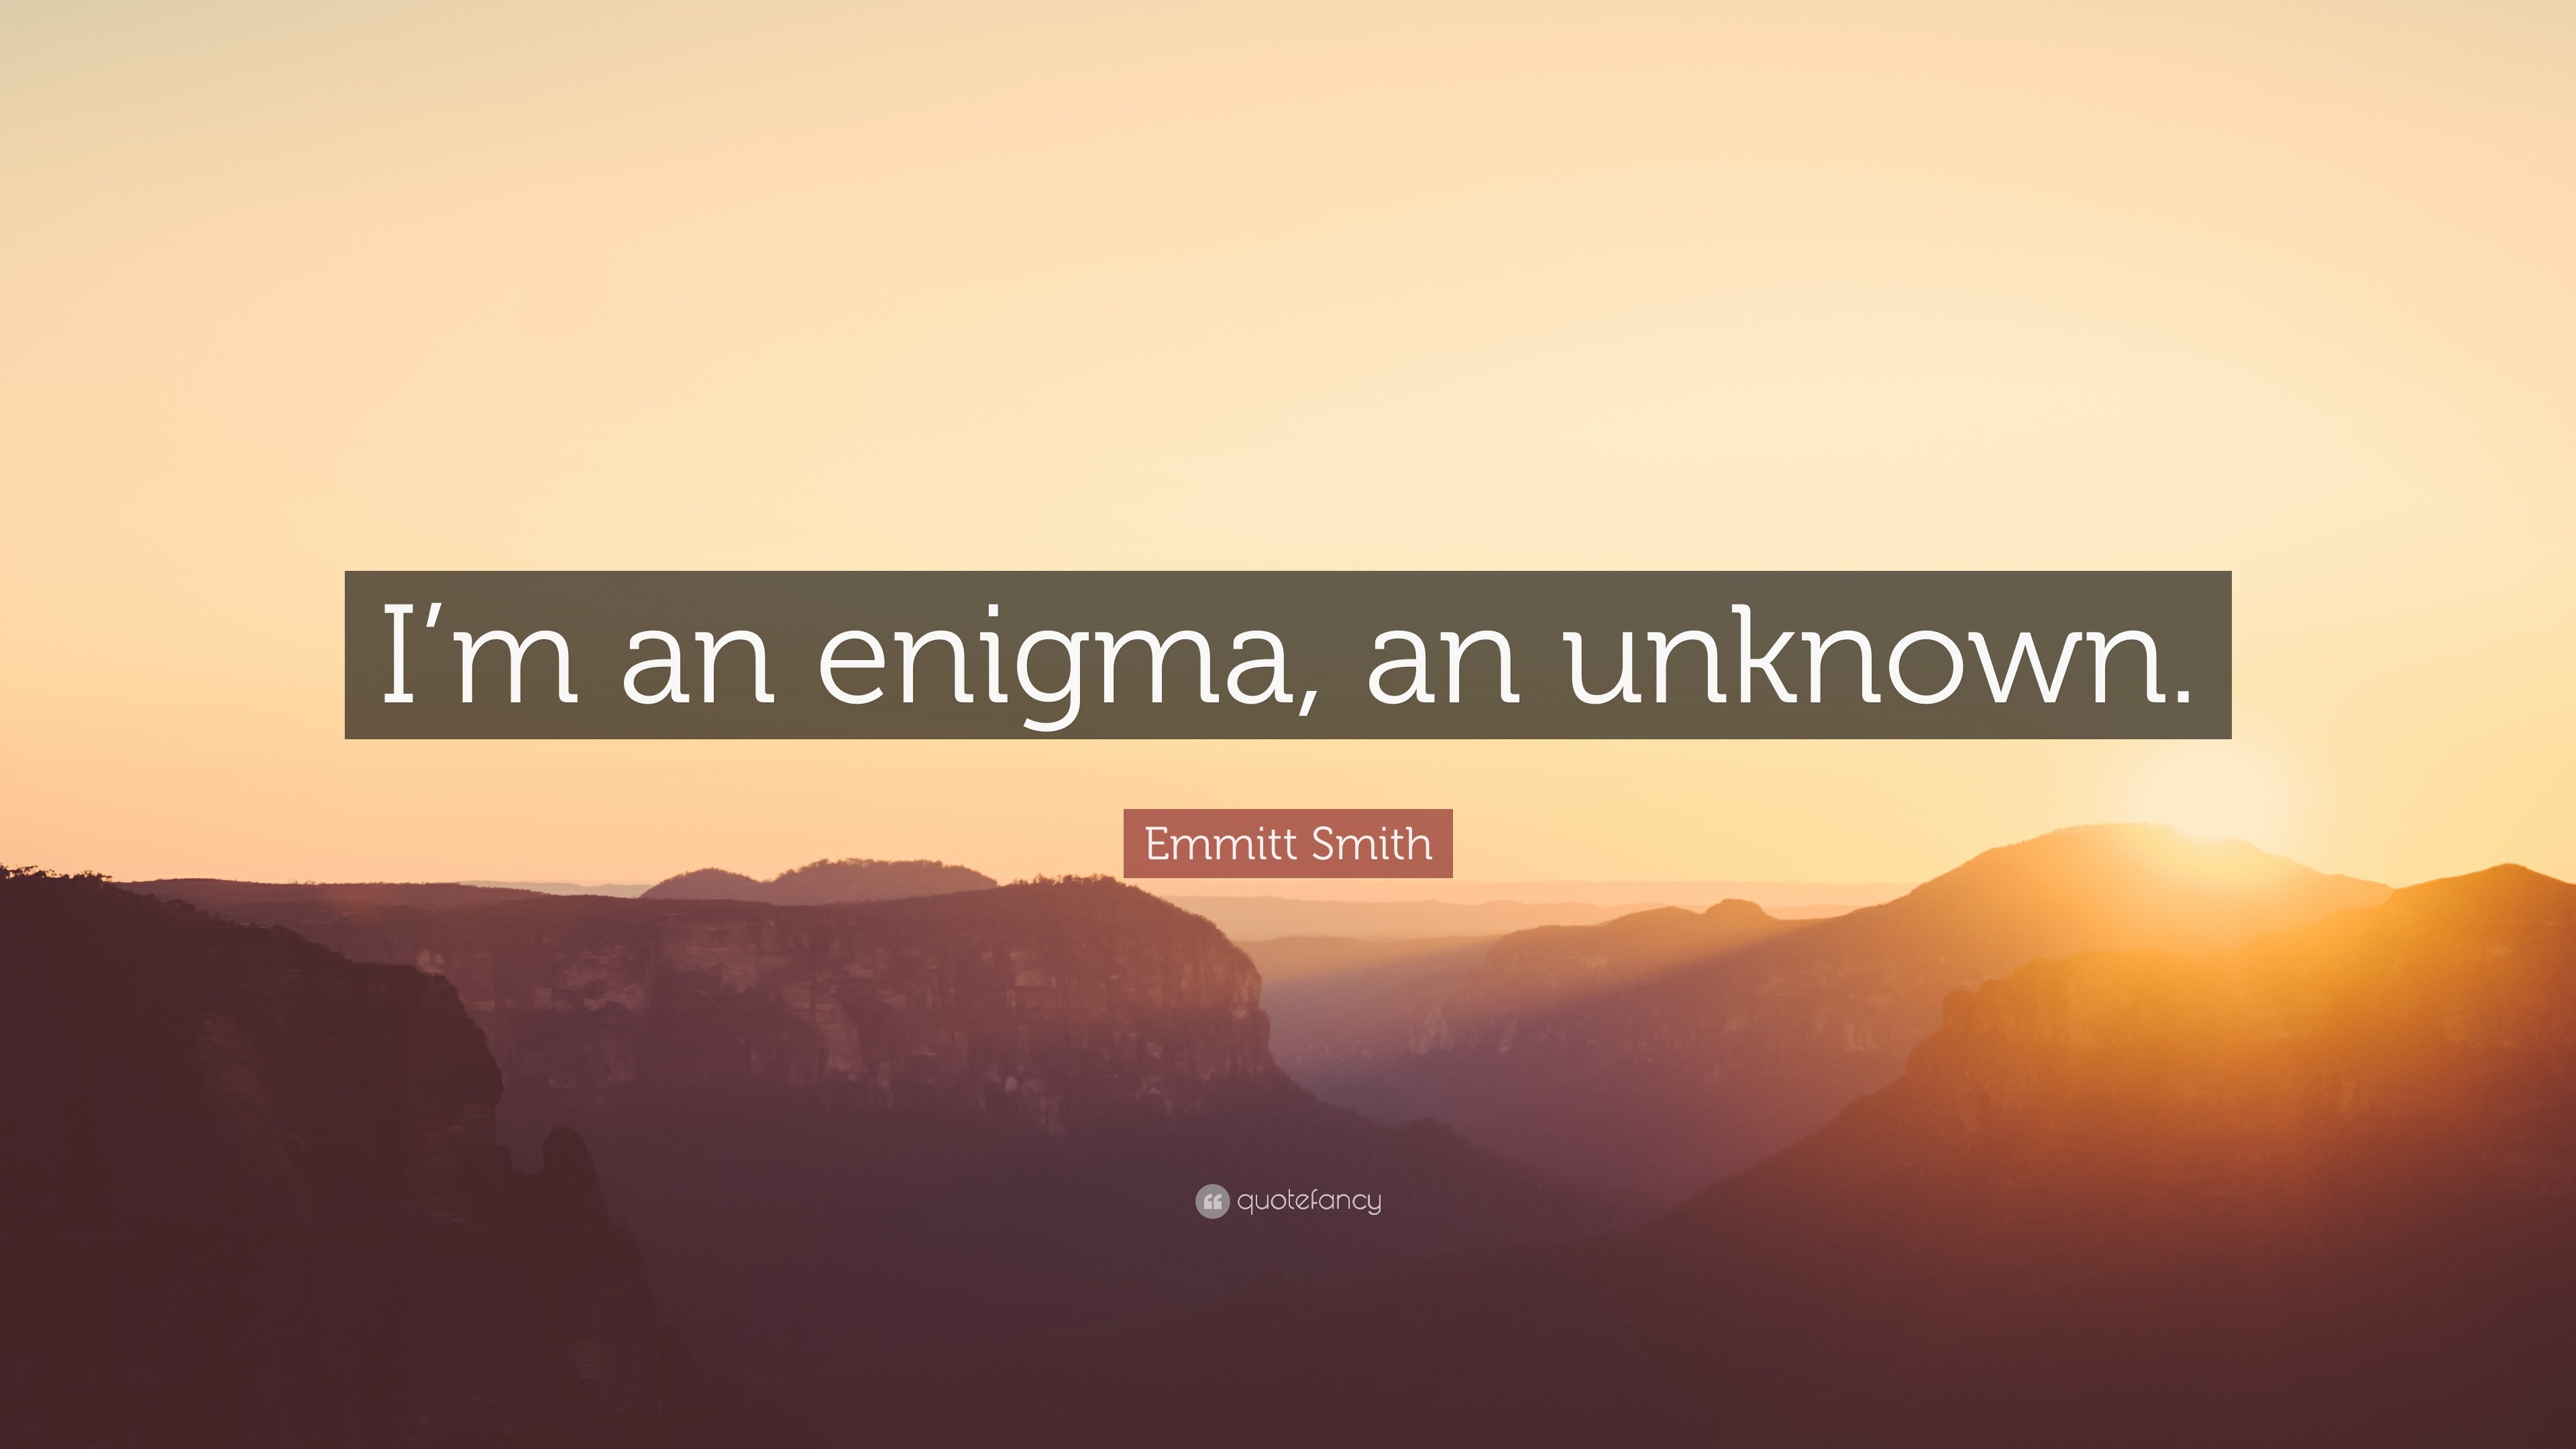 3840x2160 Emmitt Smith Quote: “I'm an enigma, an unknown.”